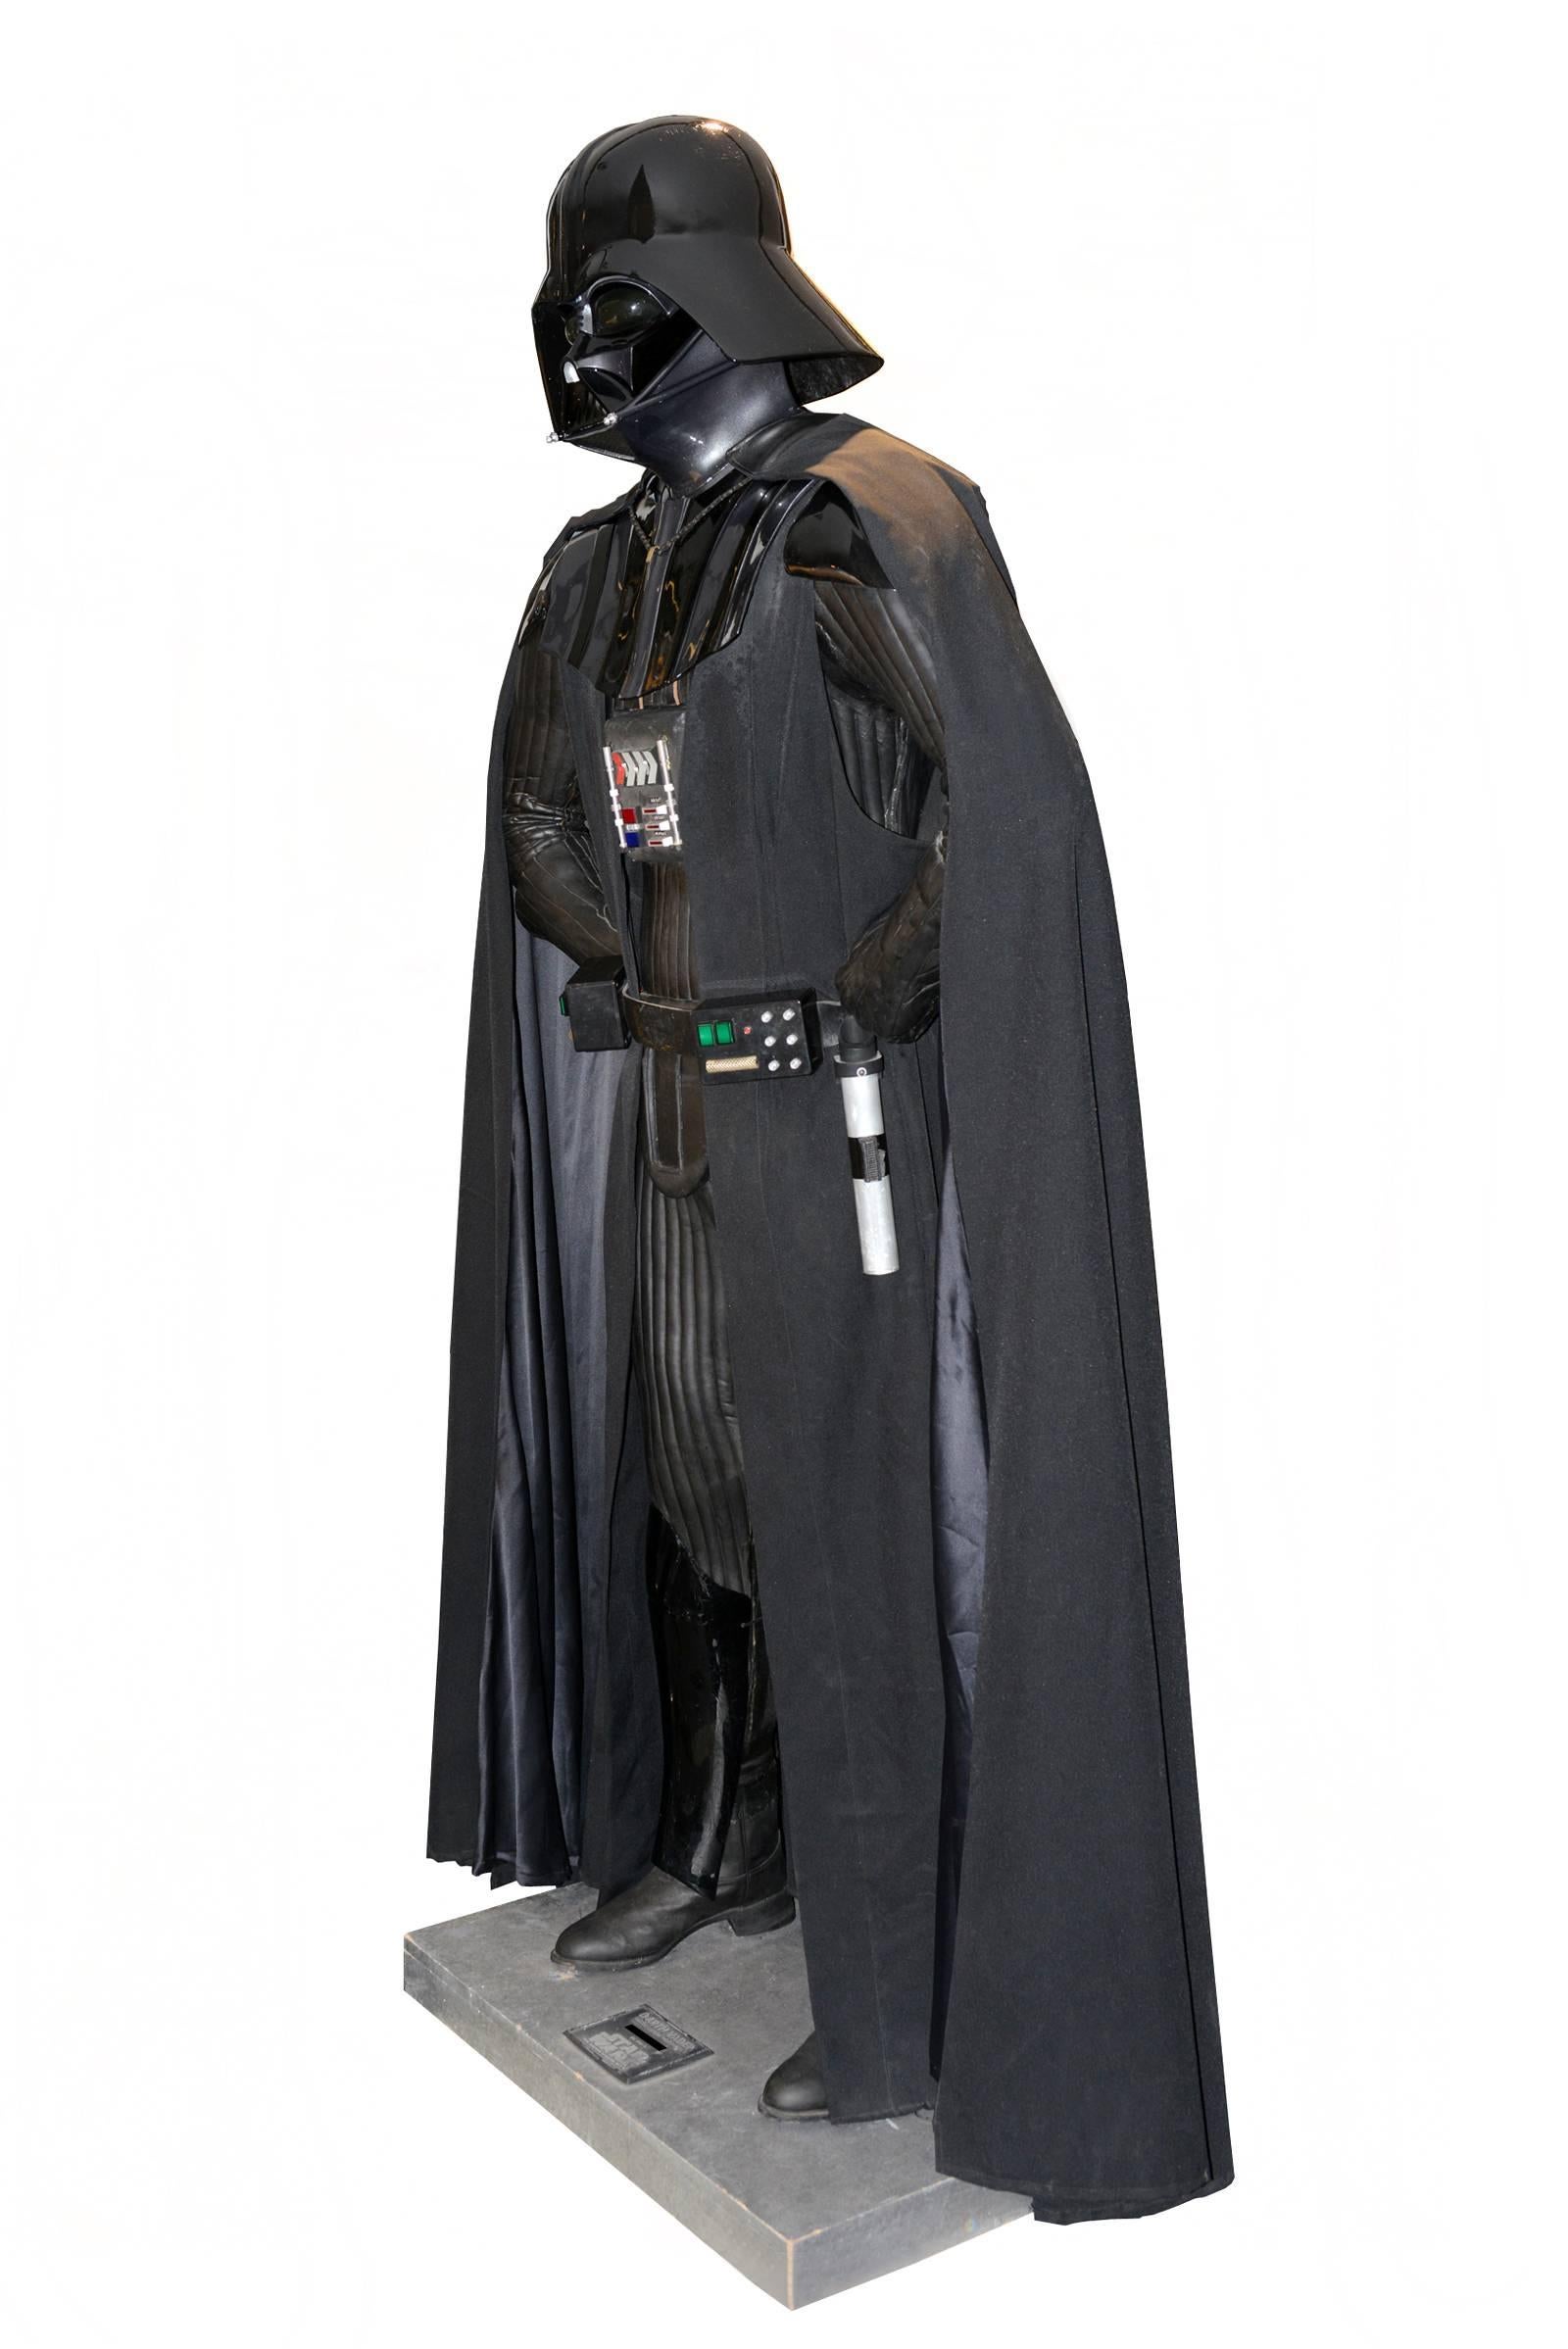 Dark Vador life size statue Studio Rubie's Star Wars
in collaboration with Michael Burnett, made in 1997,
for 20th Saga Birthday. Lucas Film. Darth Vader
Limited edition 76/500, vintage collector rare piece.
